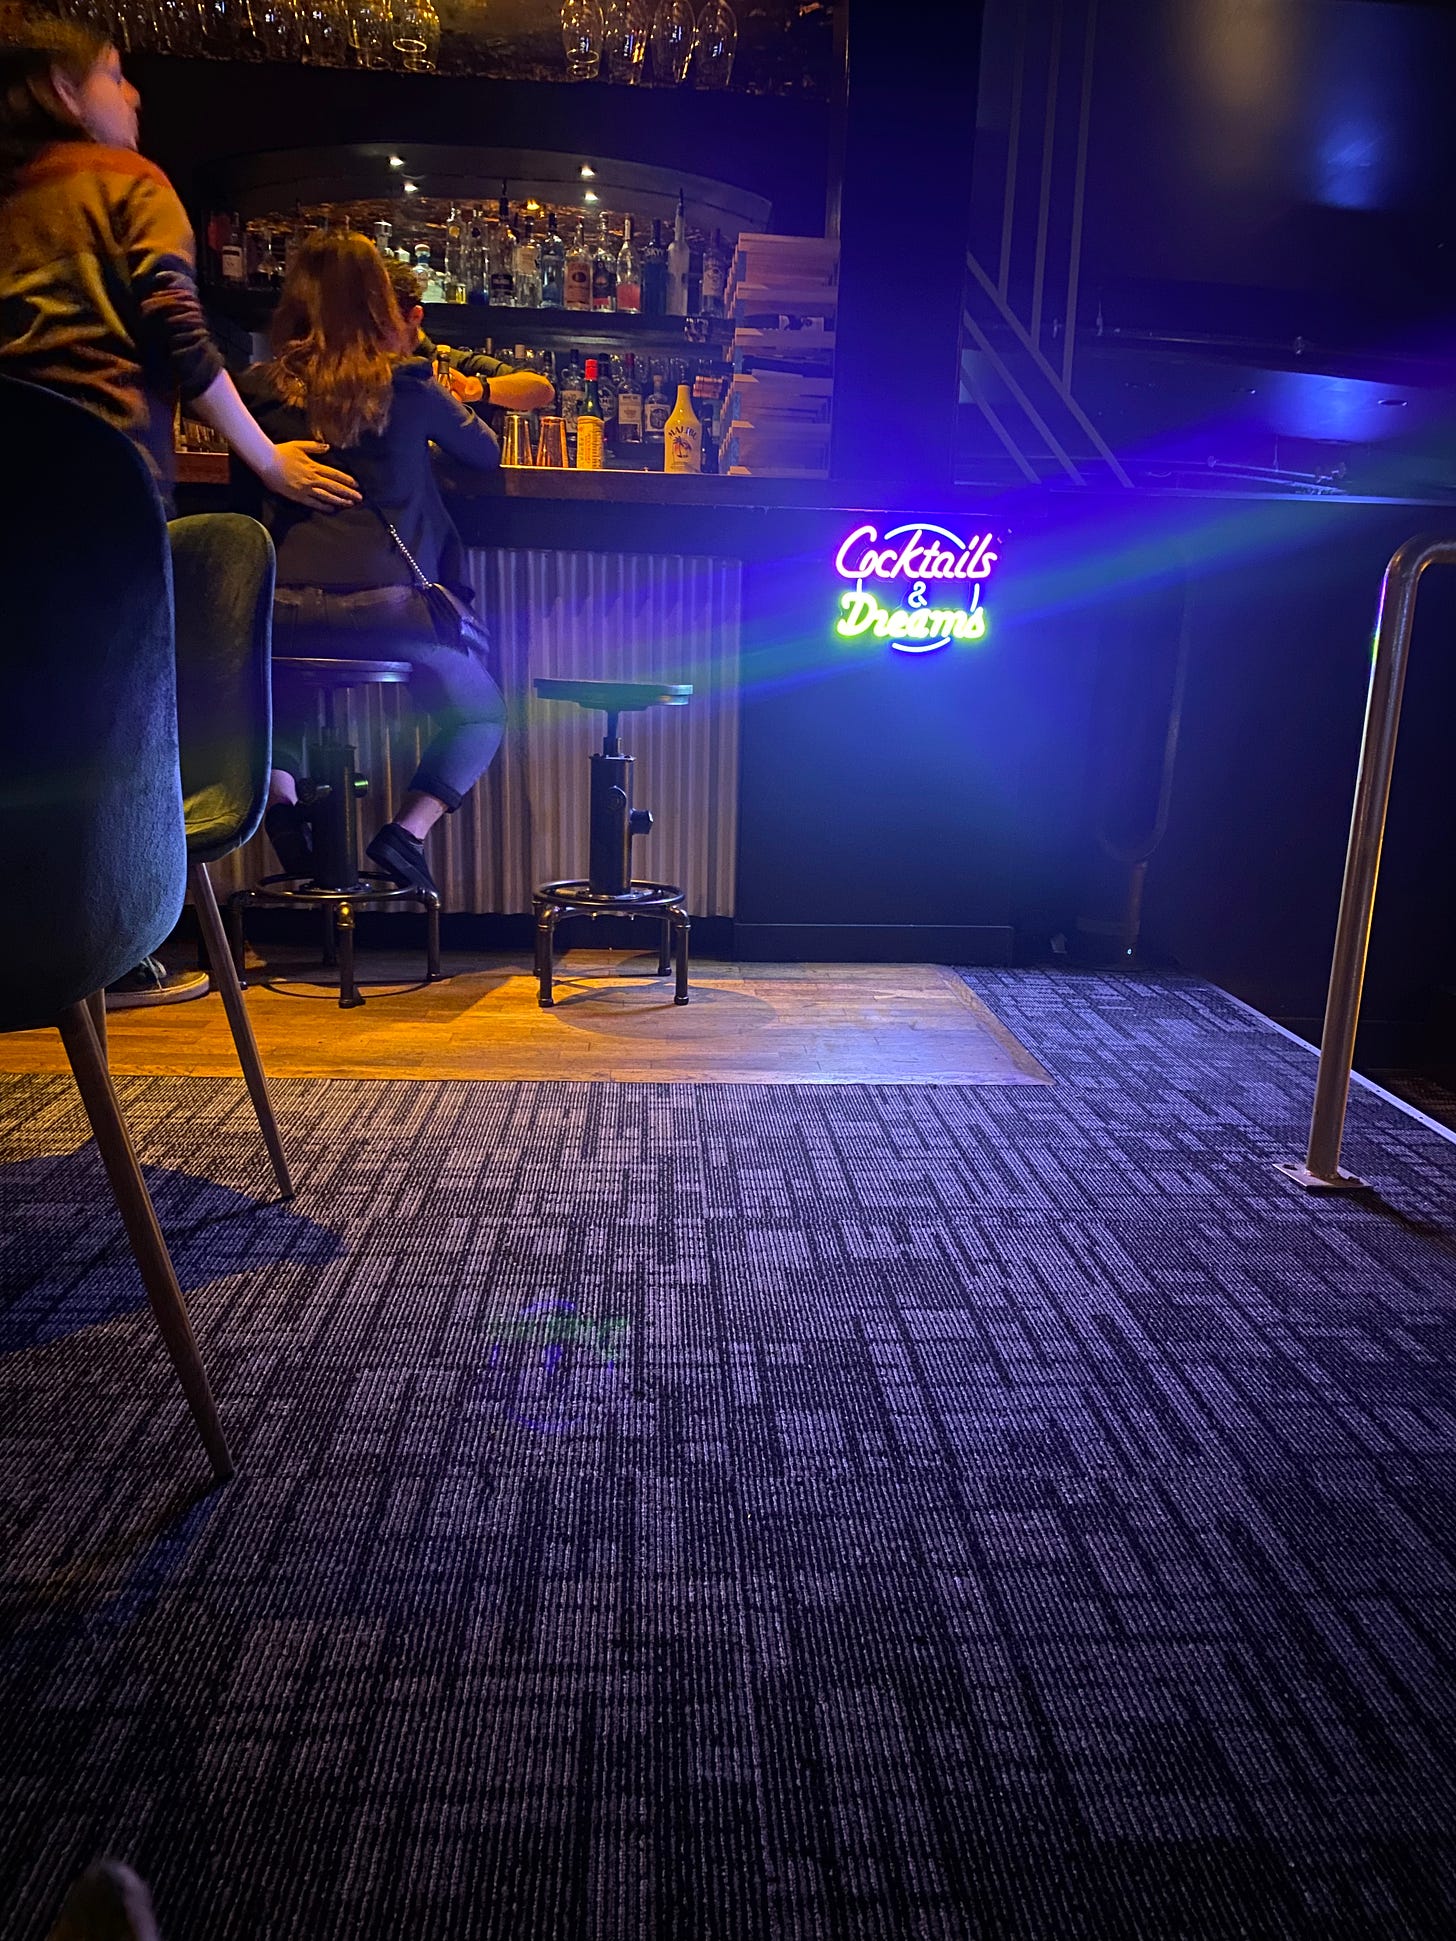 A barroom bathed in purple-blue light. The focus is on a neon sign on the bar front that reads 'cocktails & dreams' in pink and green. Next to it, a person standing has his hand on the back of a person sitting at the bar. In the foreground are blue velvet chairs and a geometrically patterned carpet.